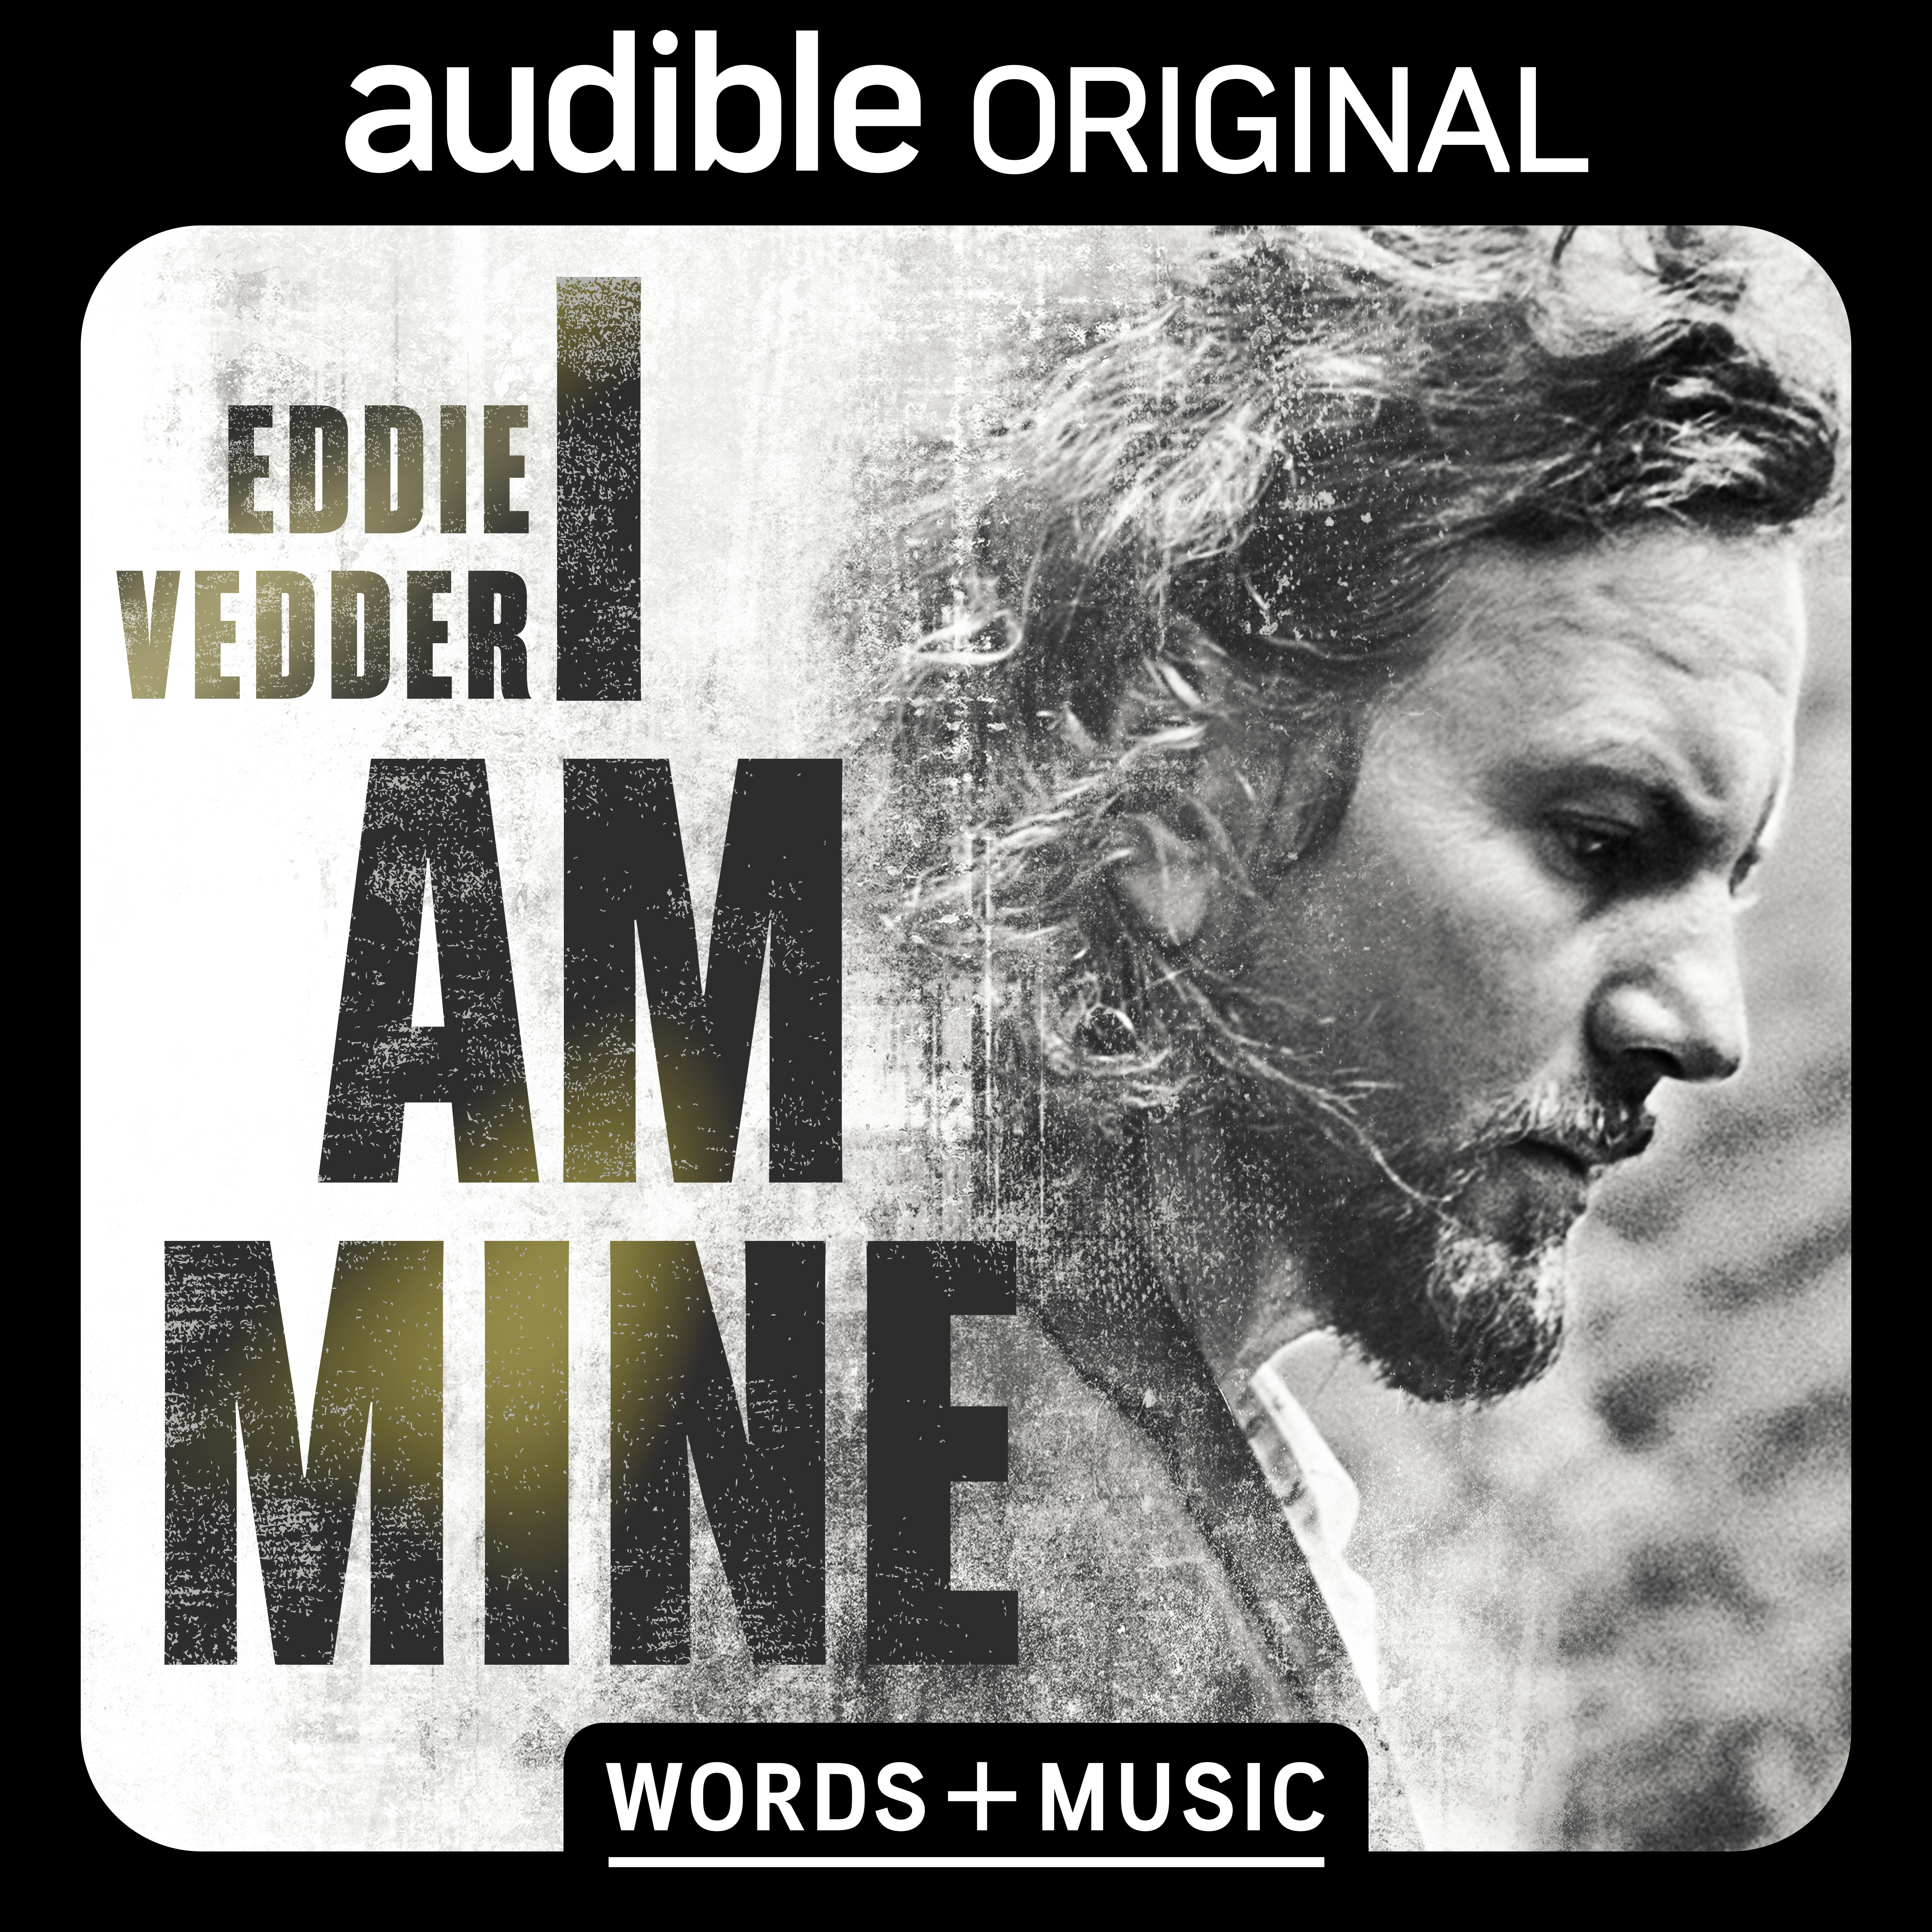 Eddie Vedder New Song "The Haves" & Earthling Album Date Out Today